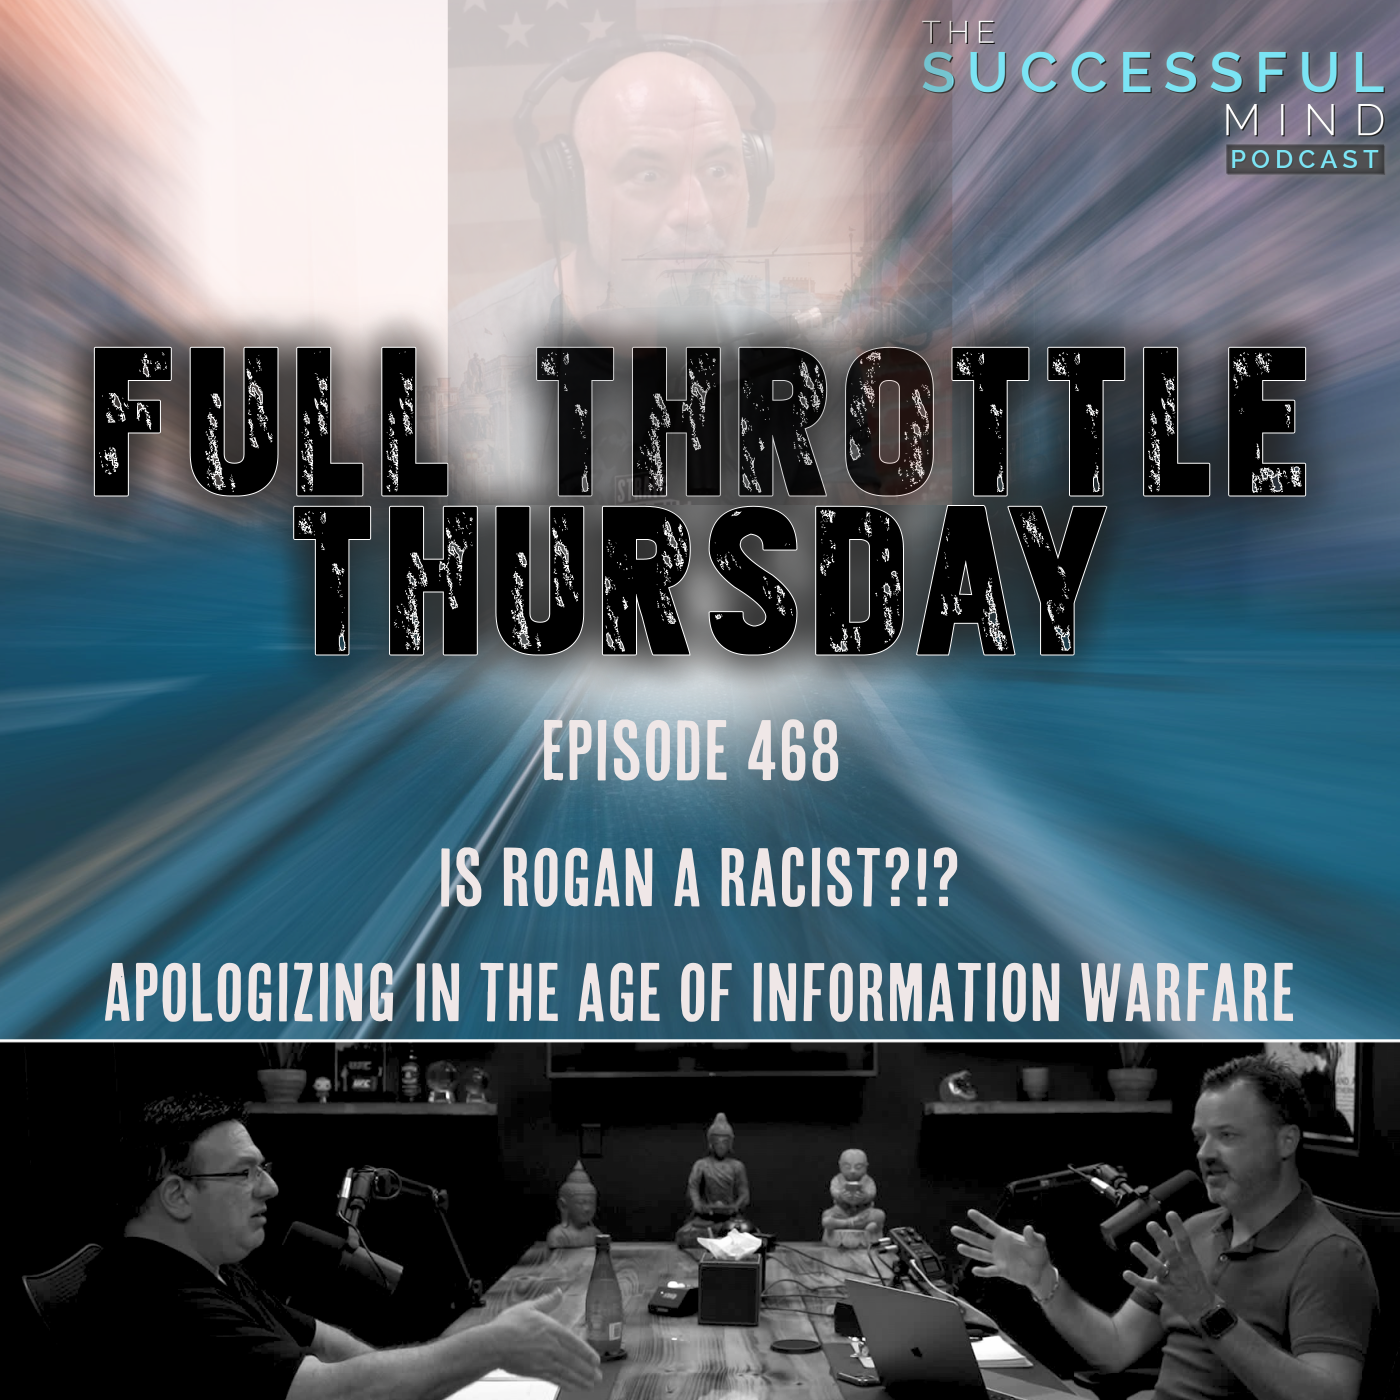 The Successful Mind Podcast - Full Throttle Thursday - Is Rogan a Racist?!? Apologies in the Age of Information Warfare